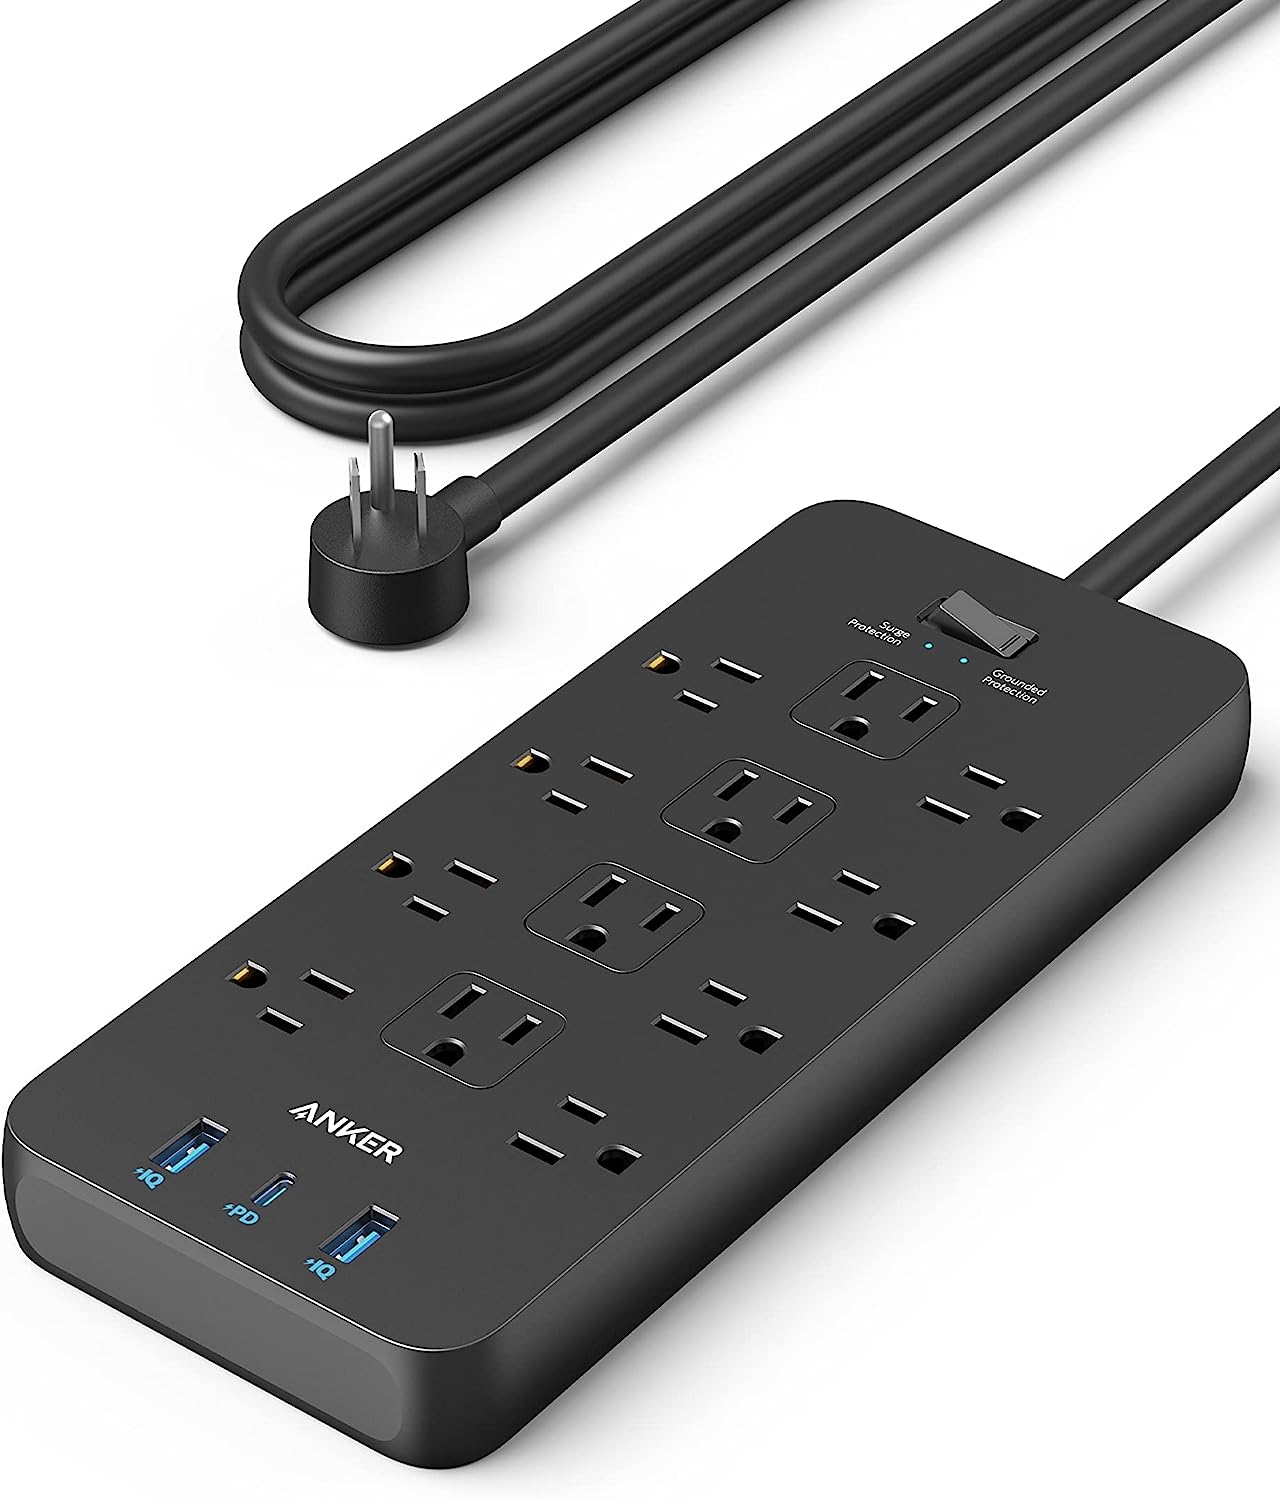 Anker Power Strip Surge Protector (2100J), 12 Outlets [...]